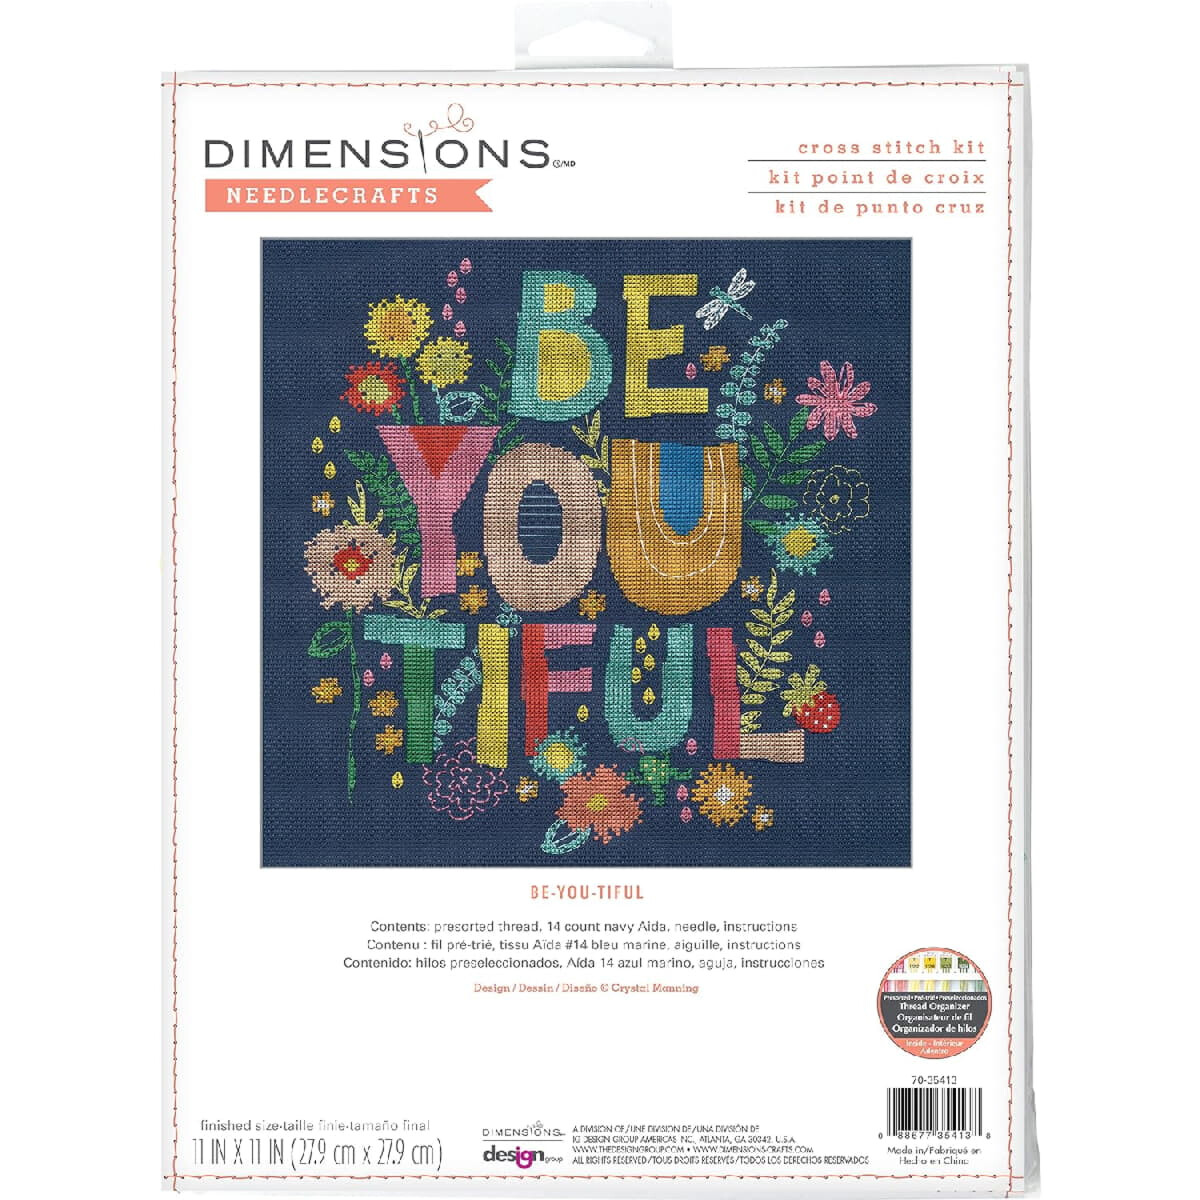 Dimensions counted cross stitch kit...